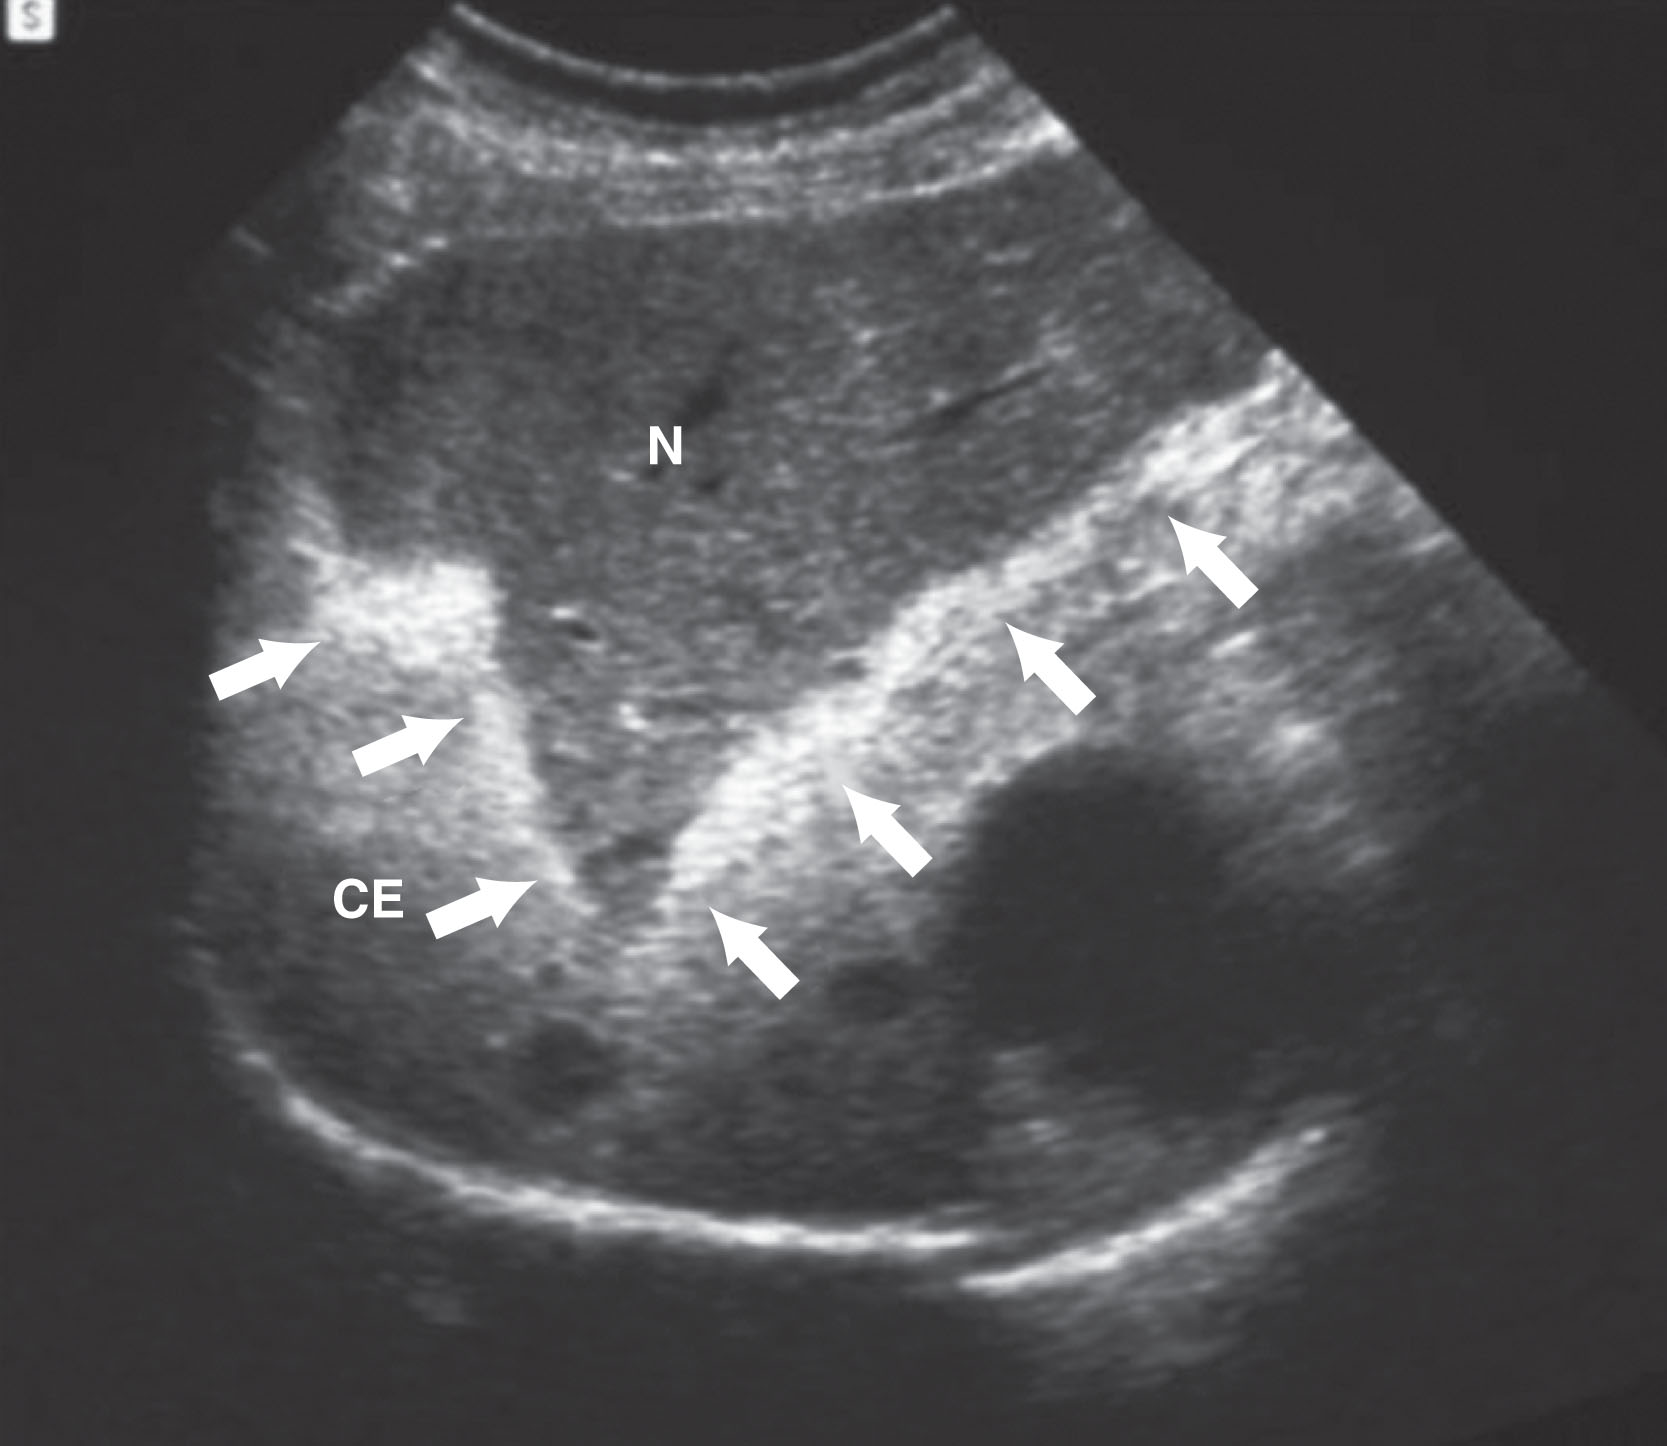 Fig. 17.5, Gray-scale contrast harmonic imaging display of the acoustic emission effect after intravenous injection of a tissue-specific ultrasound contrast agent. As the acoustic energy traverses through the liver parenchyma, it causes the contrast microbubbles to rupture, resulting in a characteristic wave of intense echoes ( arrows ). The normal echogenicity of the liver parenchyma in the near field (N) is restored after the microbubbles have ruptured, whereas deep to the acoustic emission wave, the contrast-enhanced tissue (CE) remains echogenic because of the presence of intact microbubbles. This effect is dramatic when visualized in real time.